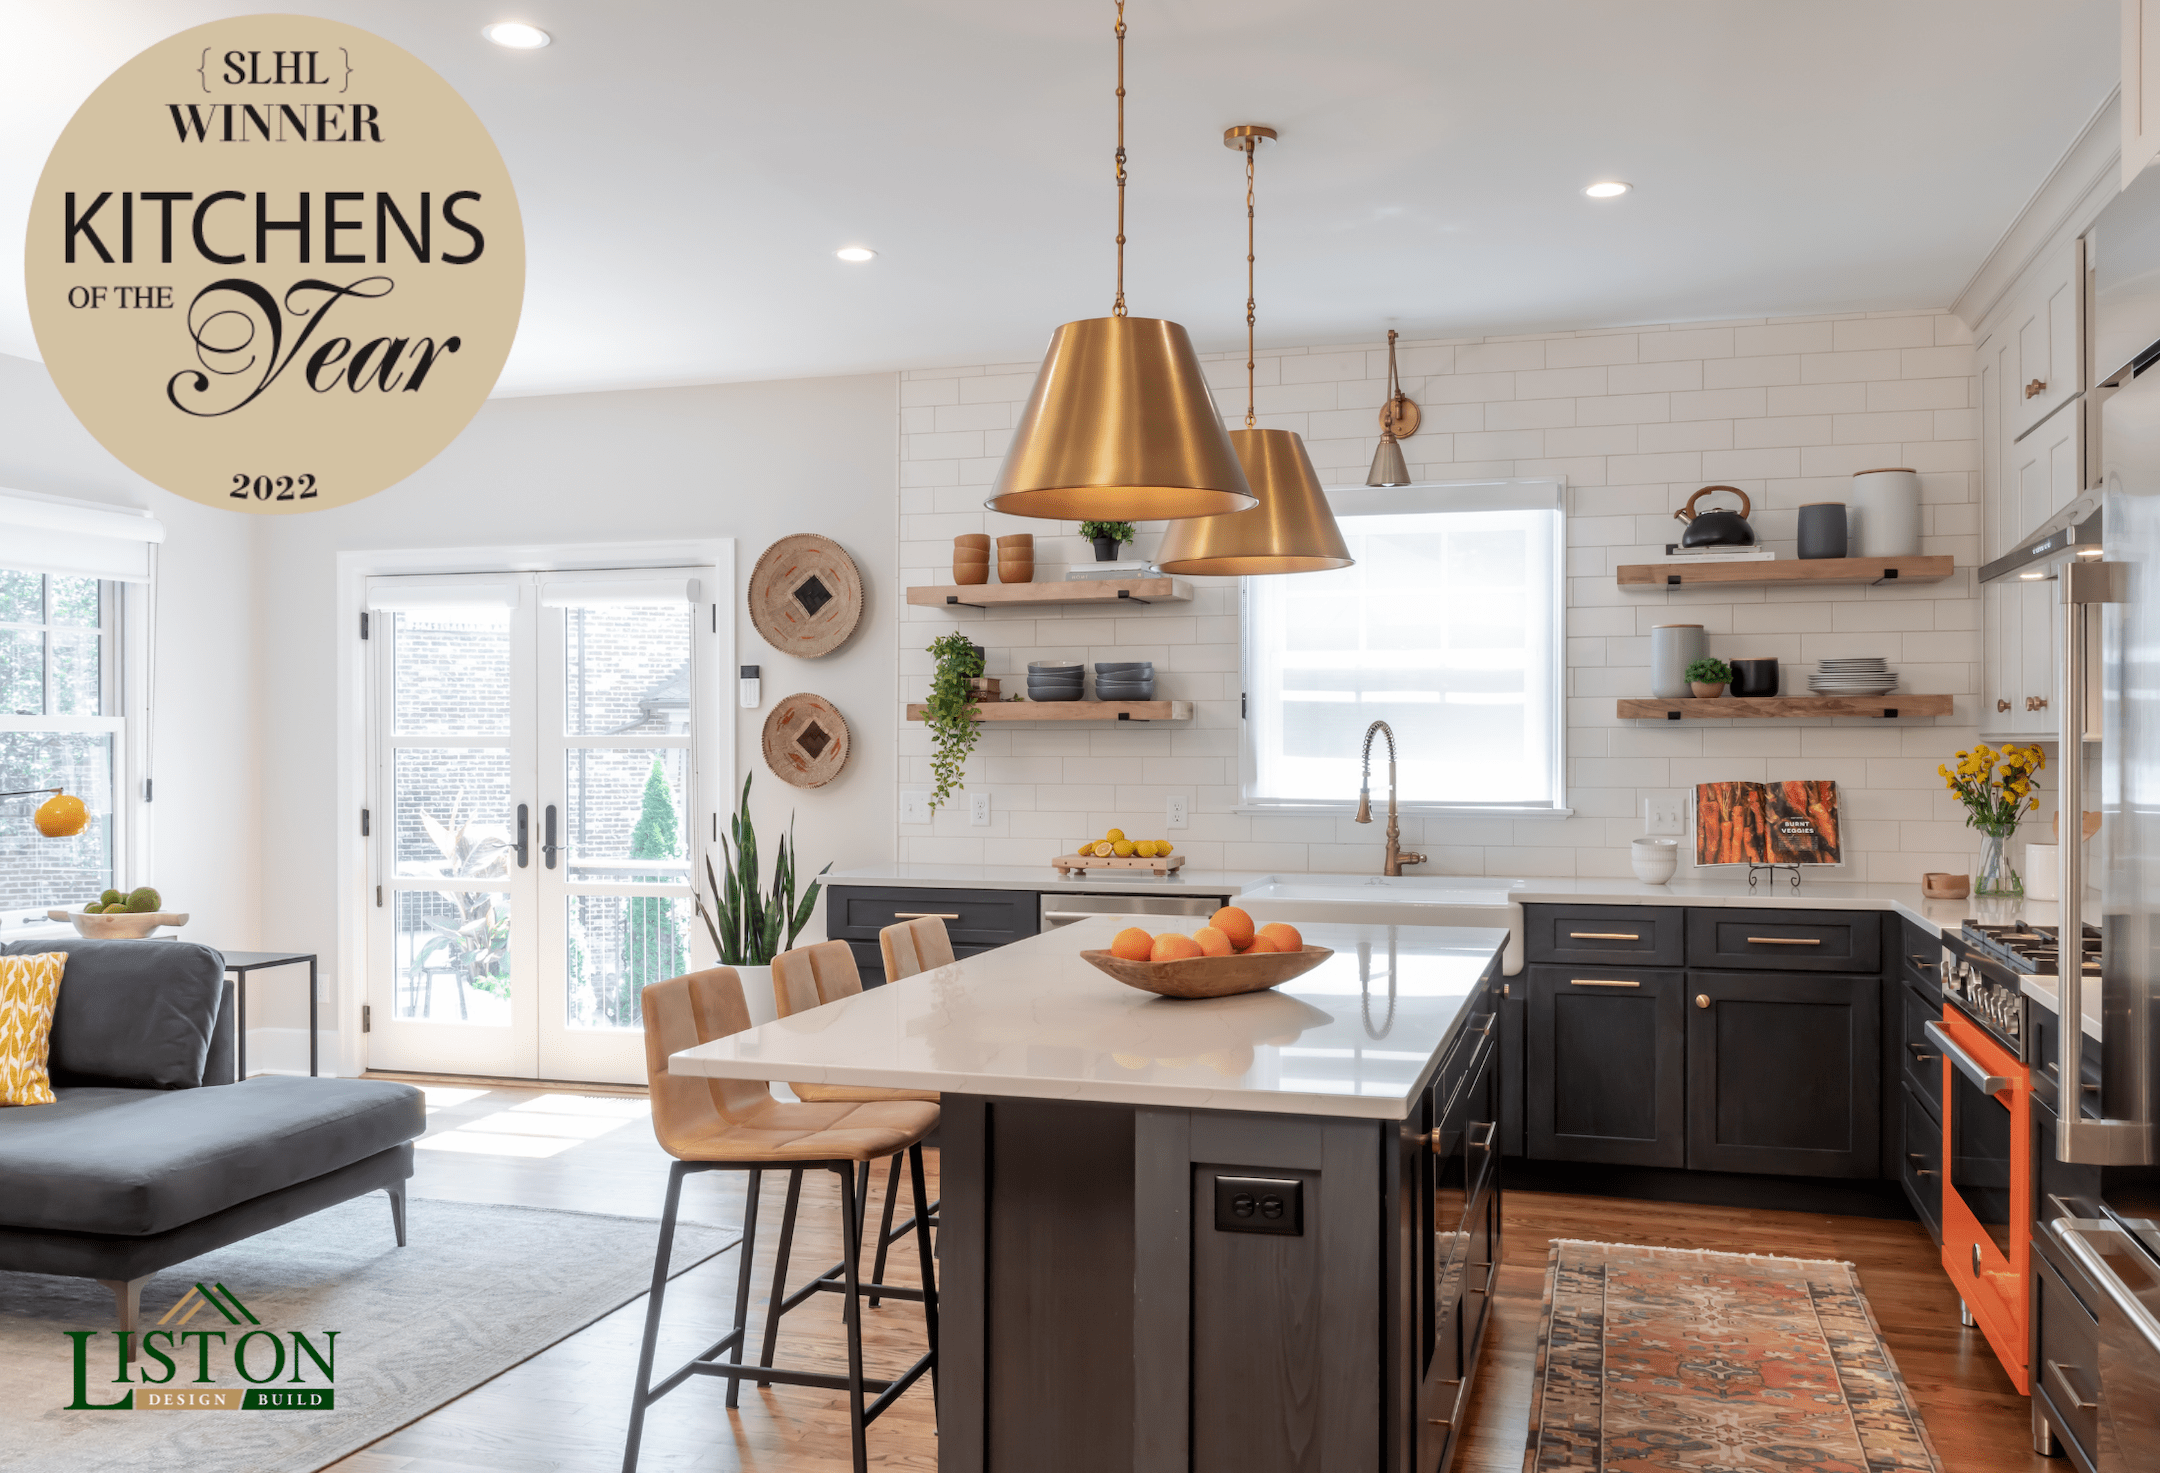 Kitchen of the Year Award Winner by St. Louis Homes & Lifestyles